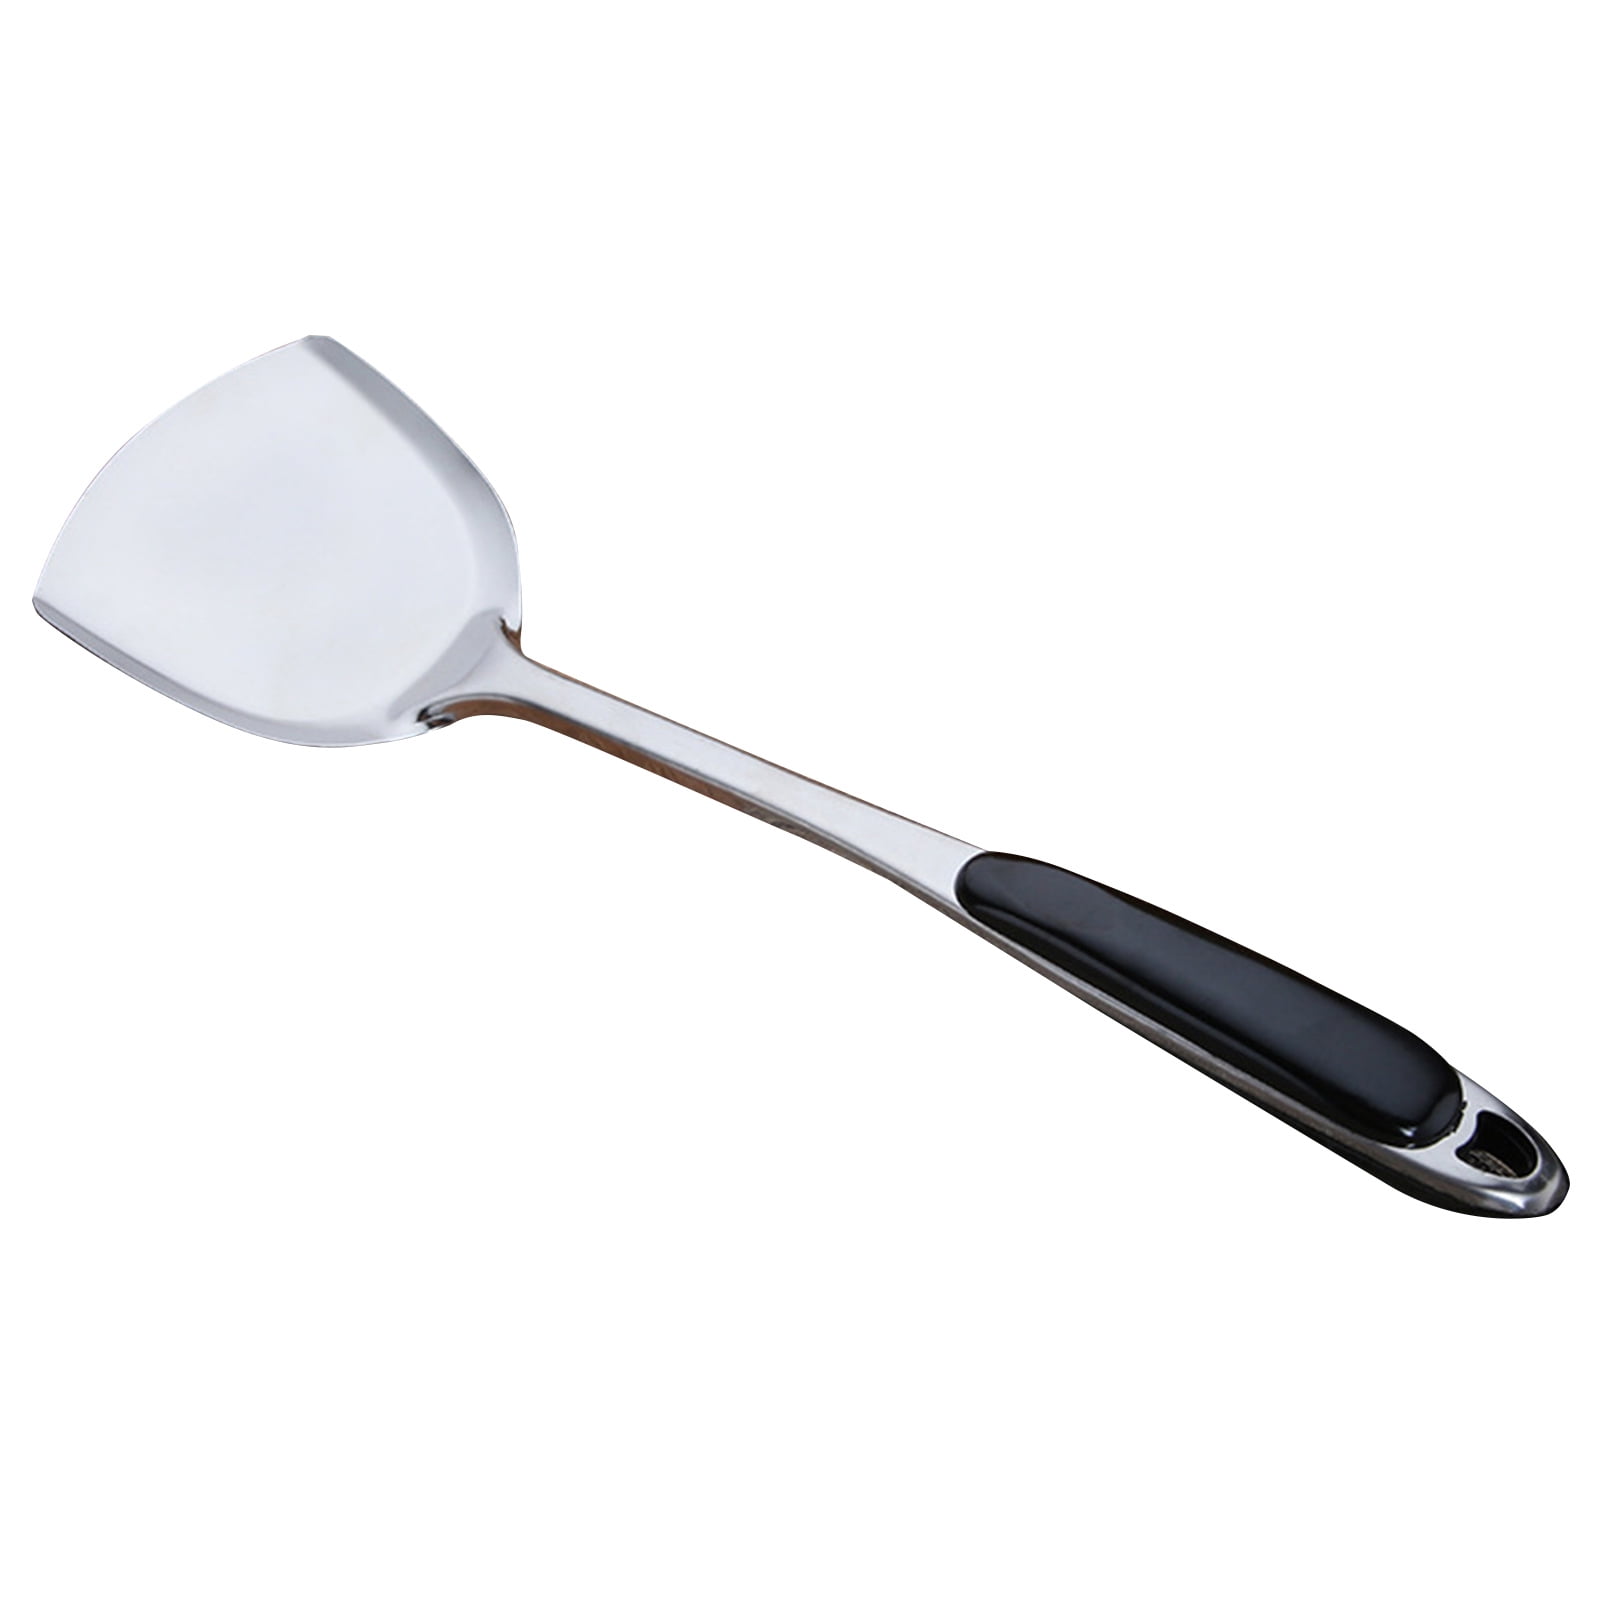 Cheers US Hot Pot Strainer Scoops Hotpot Soup Ladle Spoon Set Skimmer Spoon  Slotted Strainer Ladle Gravy Ladle Colander Kitchen Cooking Utensil 